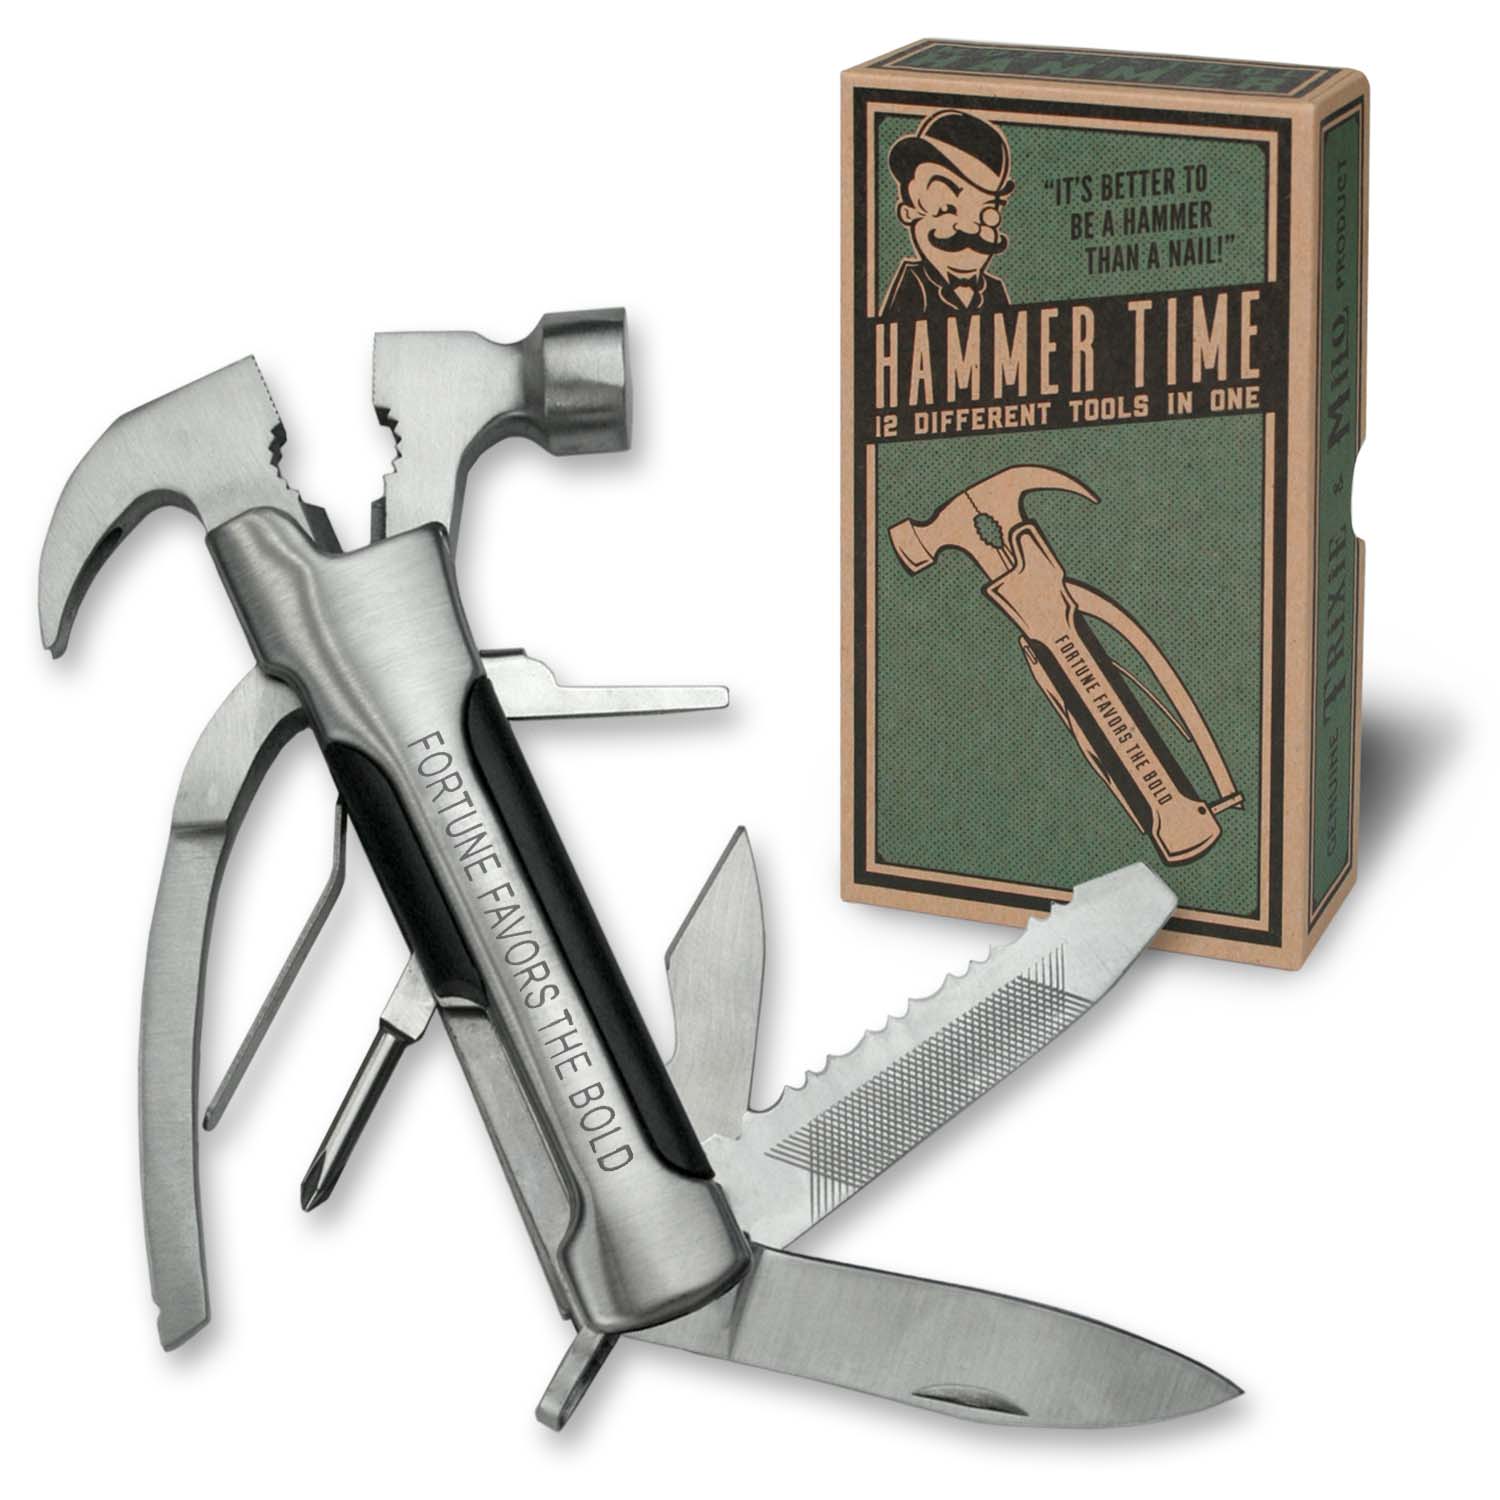 "Hammer Time" Multifunction Handyman Tool  Portable, great for DIY projects, glamping, and hiking or stocking stuffer gift idea for men.